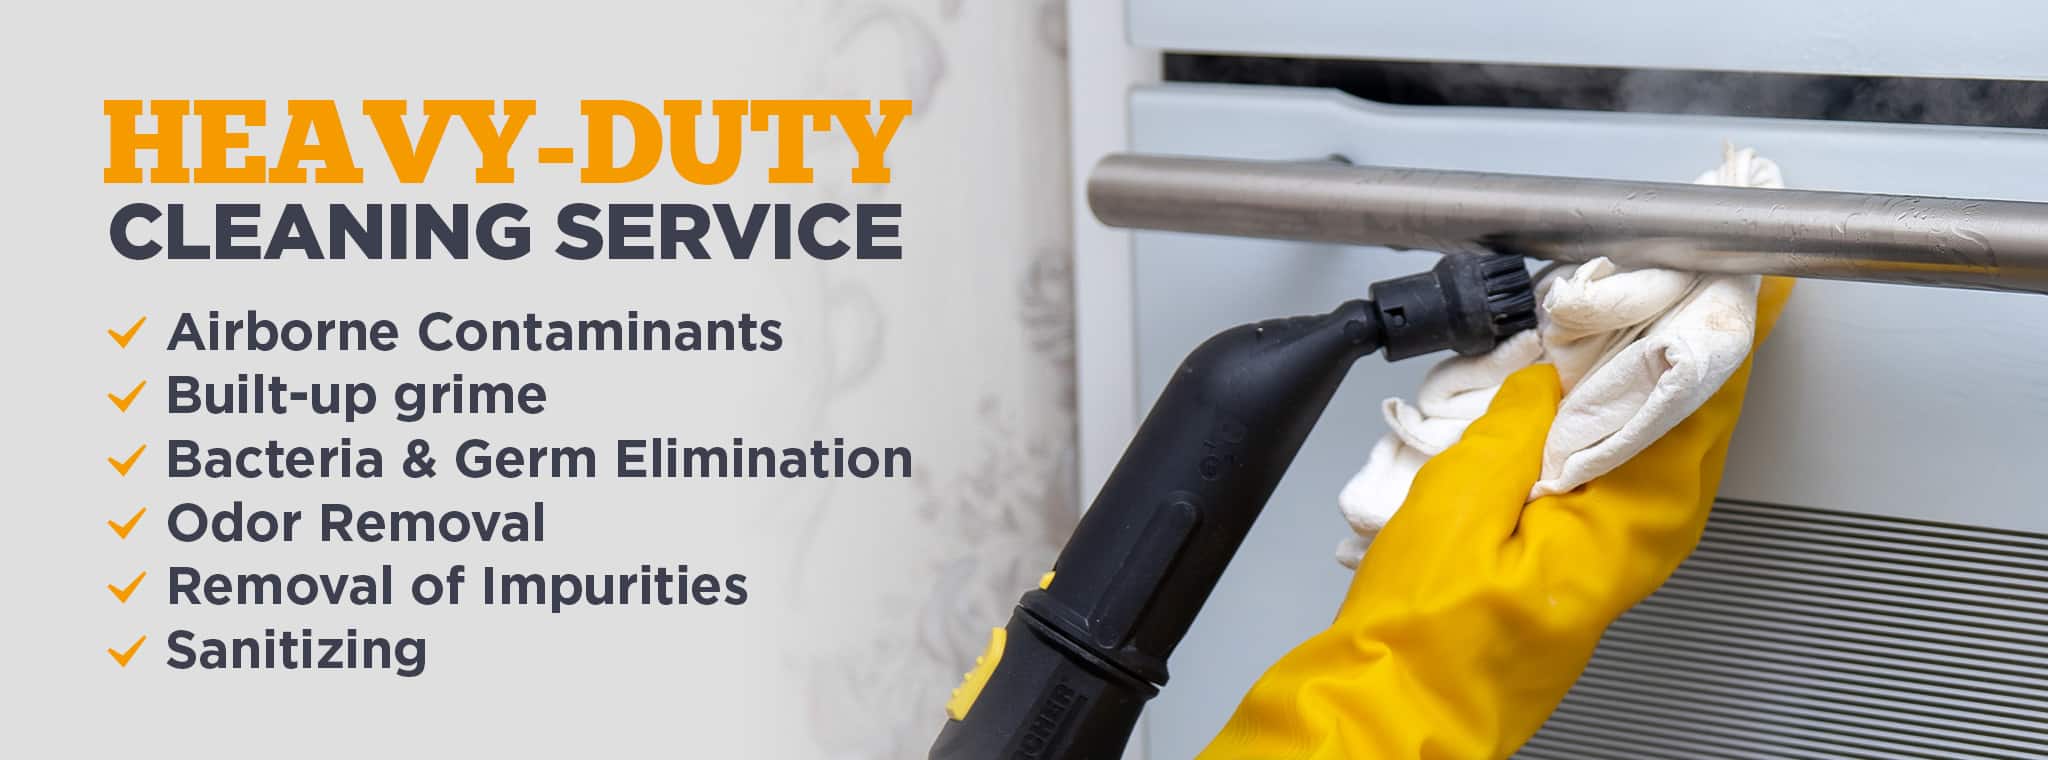 heavy duty cleaning and disinfecting for your home